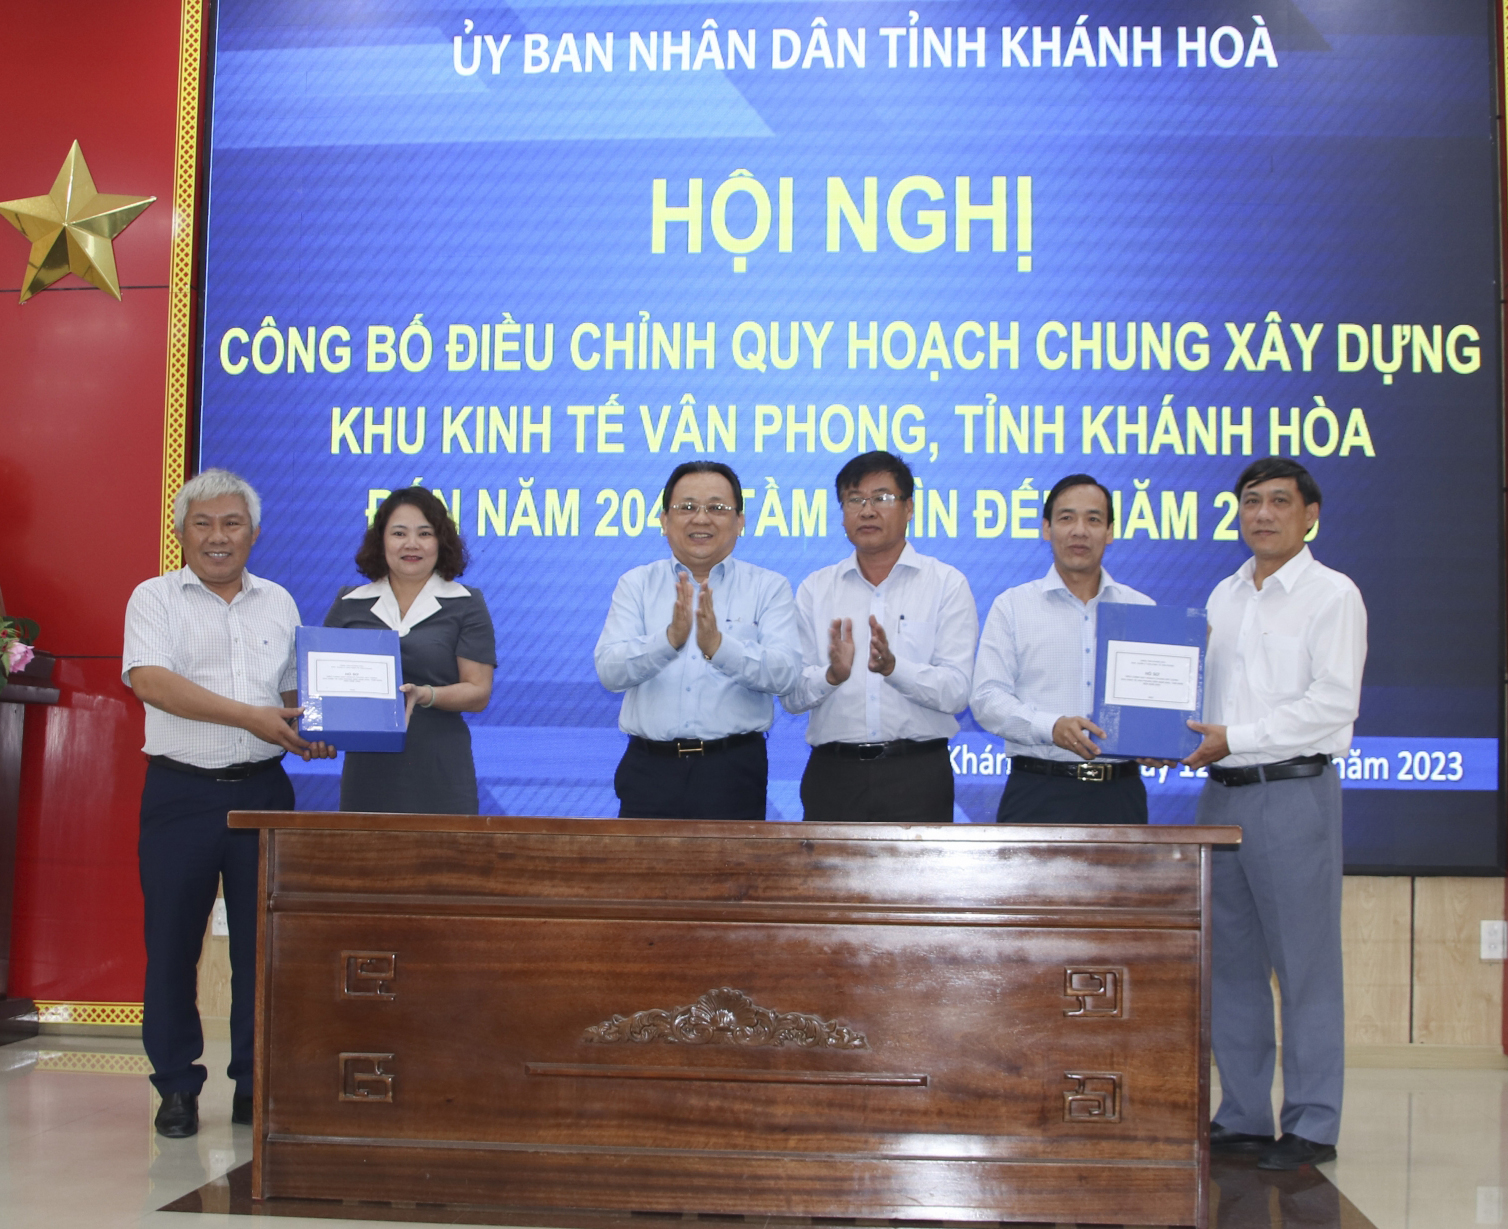 Handing over the project on adjusting the general construction planning of Van Phong Economic Zone to two localities

